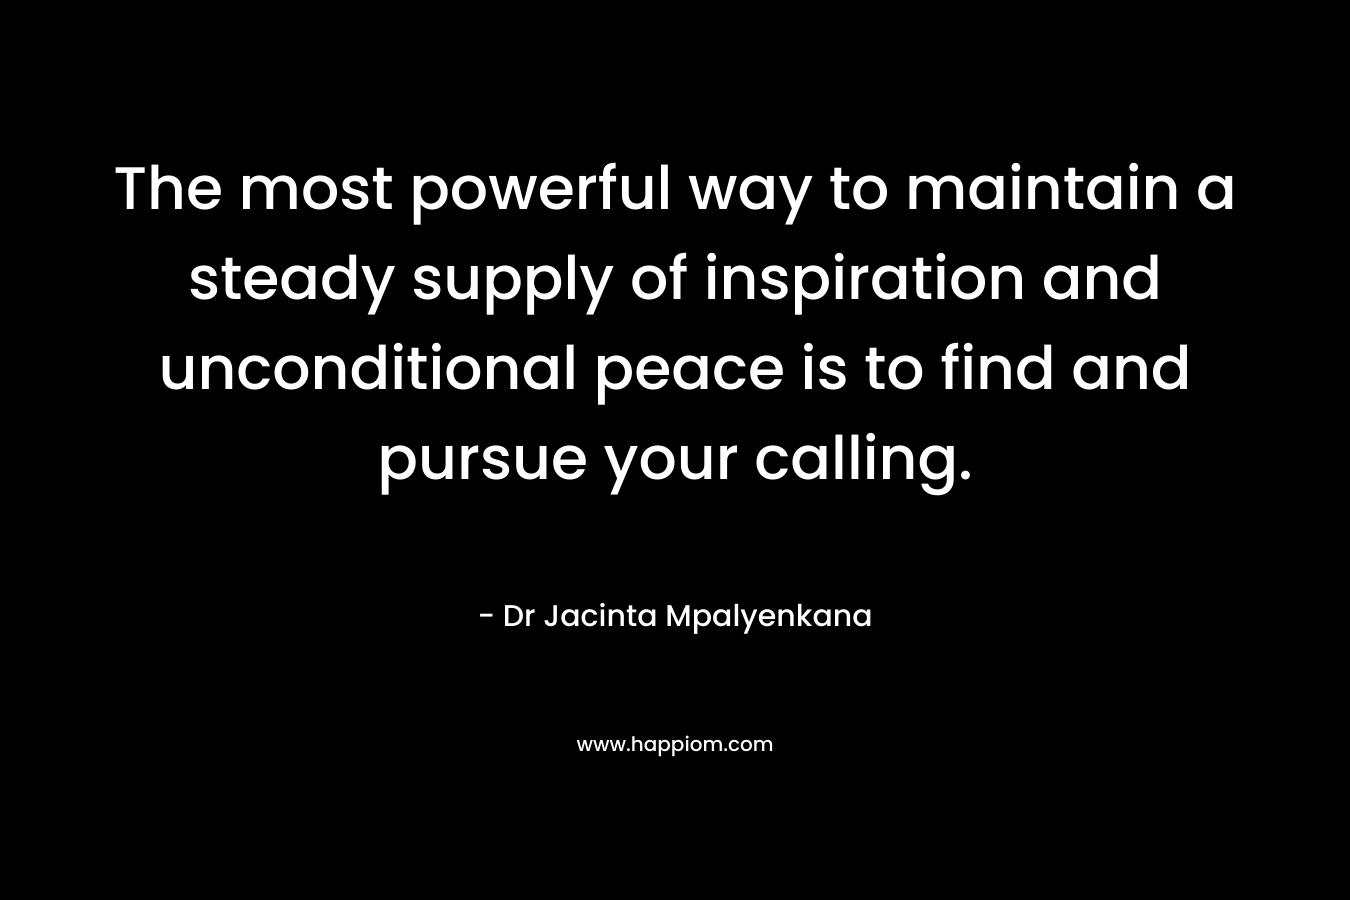 The most powerful way to maintain a steady supply of inspiration and unconditional peace is to find and pursue your calling.